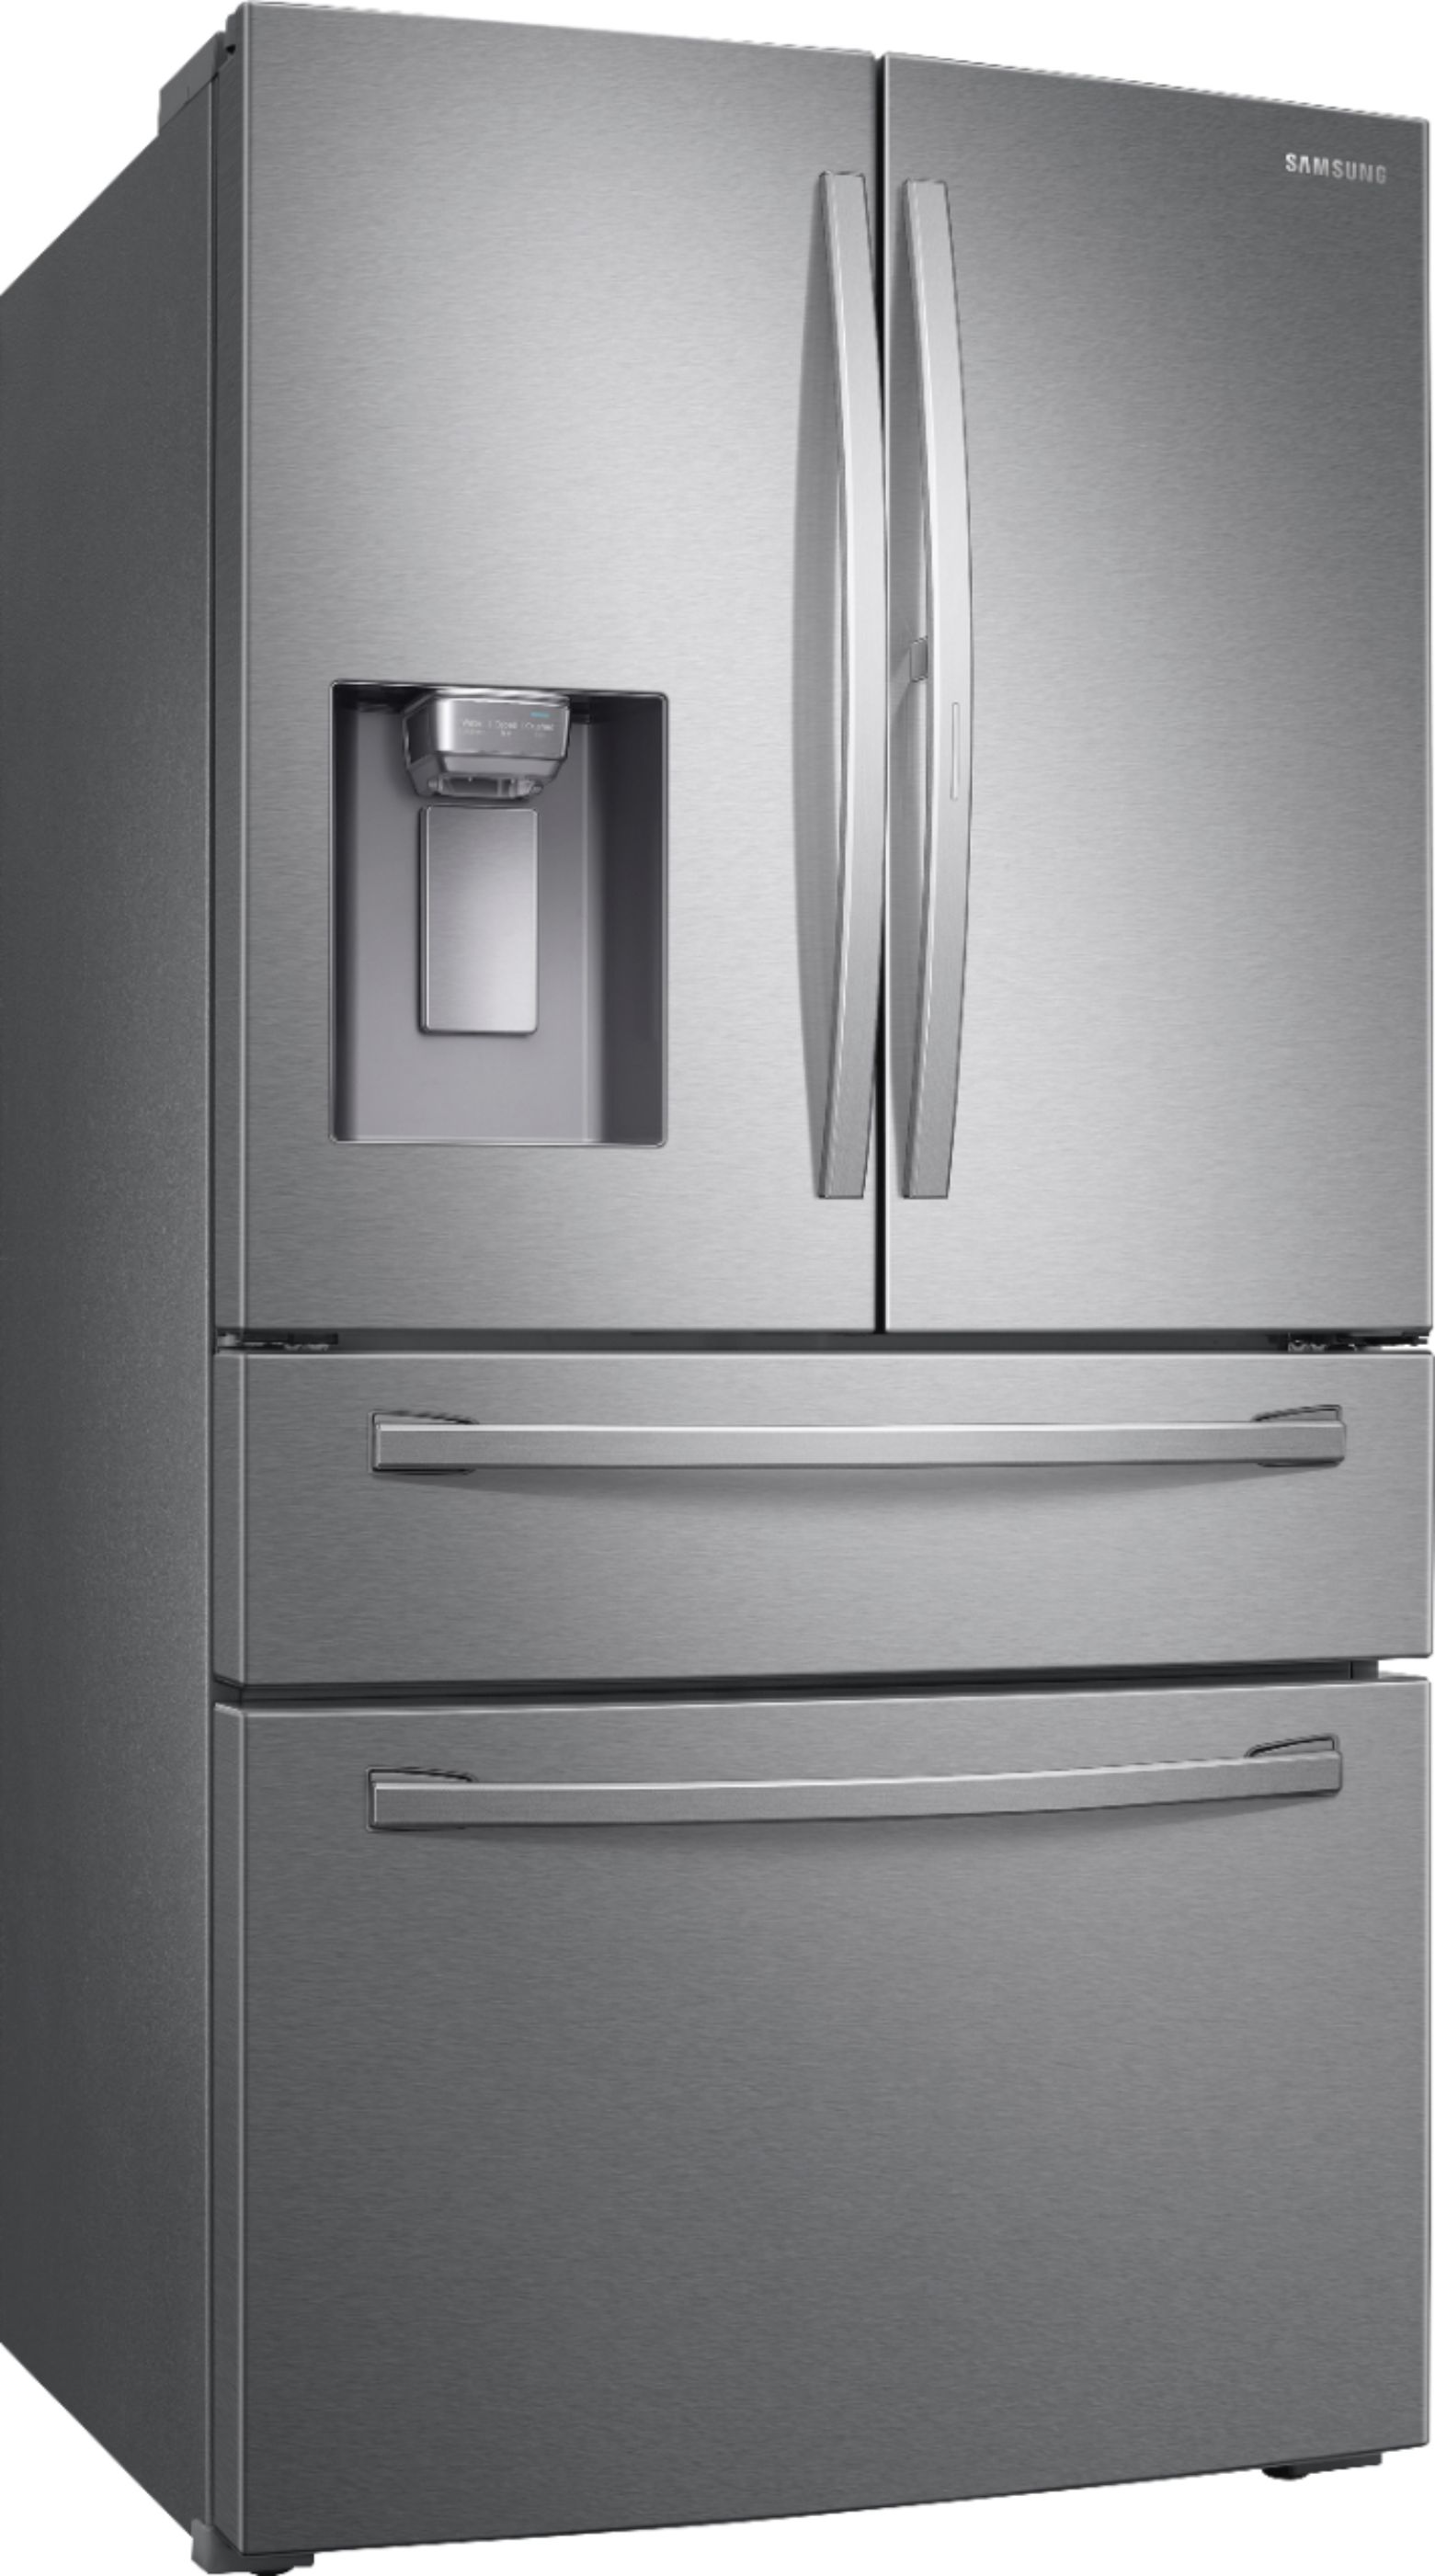 Angle View: Samsung - 27.8 cu. ft. 4-Door French Door Smart Refrigerator with Food Showcase - Stainless Steel